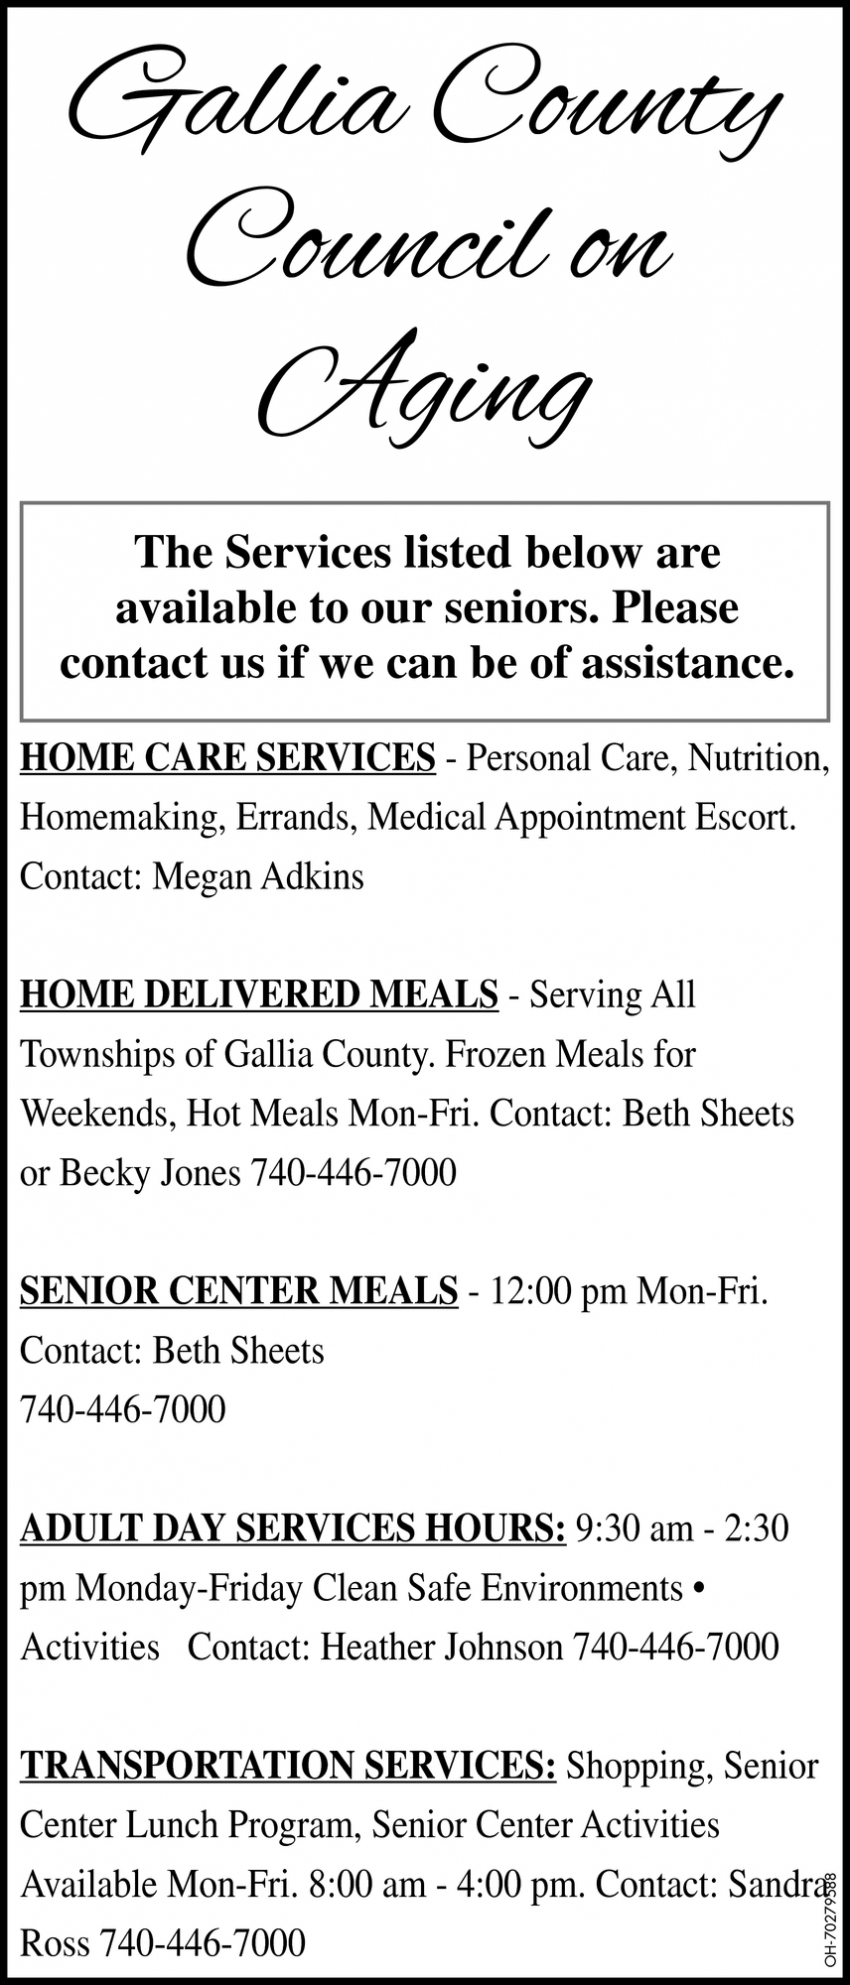 The Services Listed Below Are Availble To Our Seniors